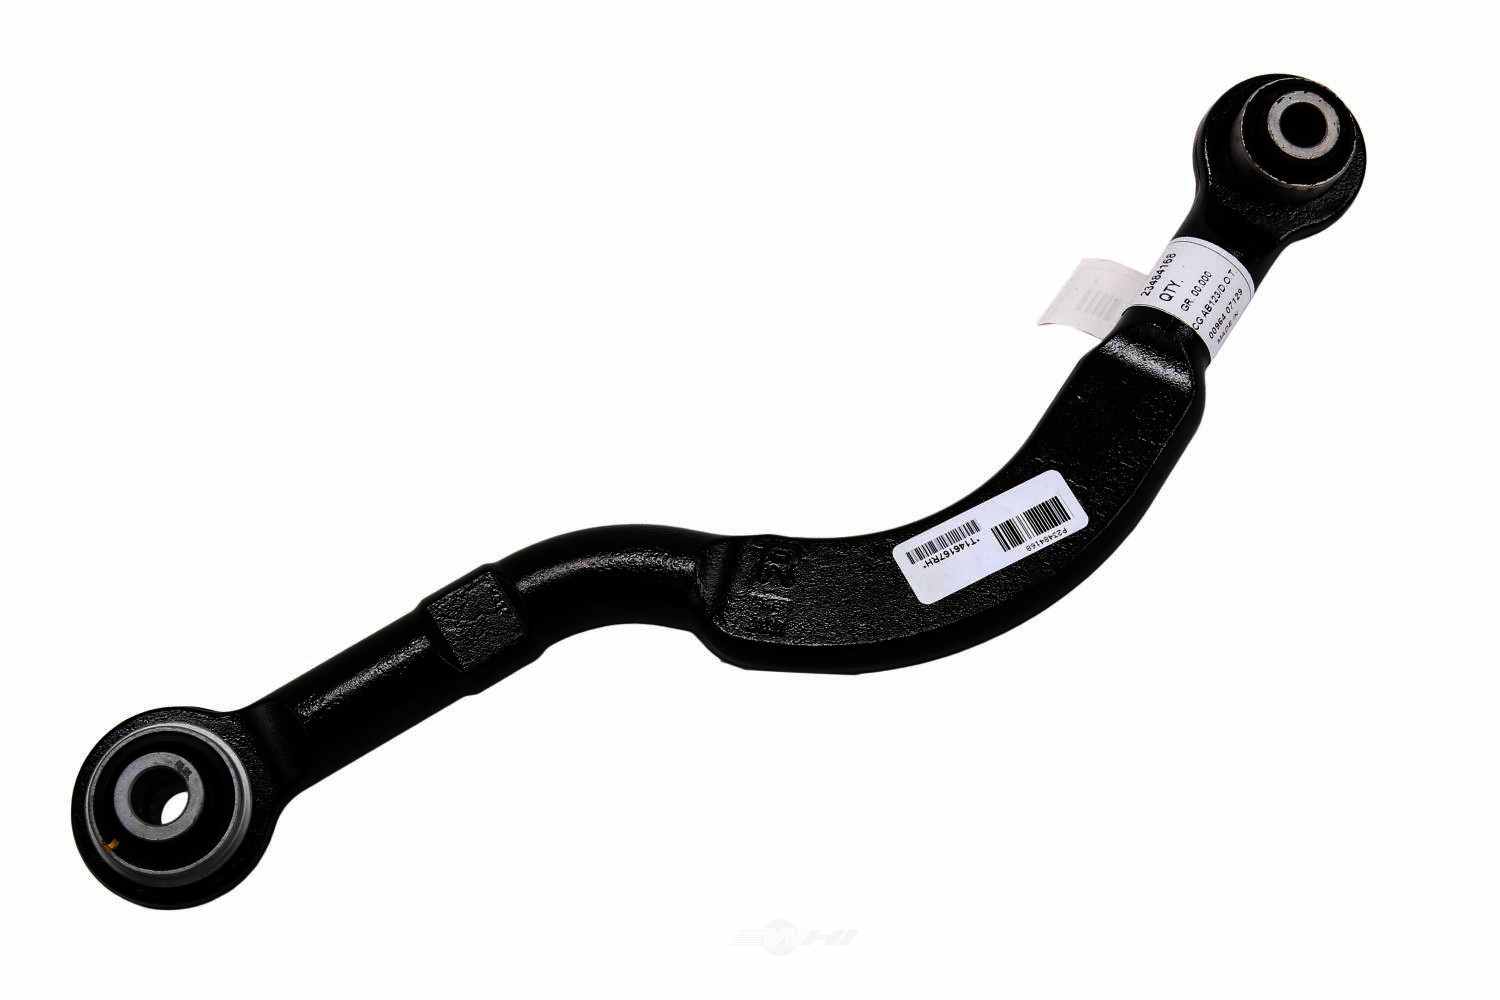 GM GENUINE PARTS CANADA - Lateral Arm - GMC 23484168